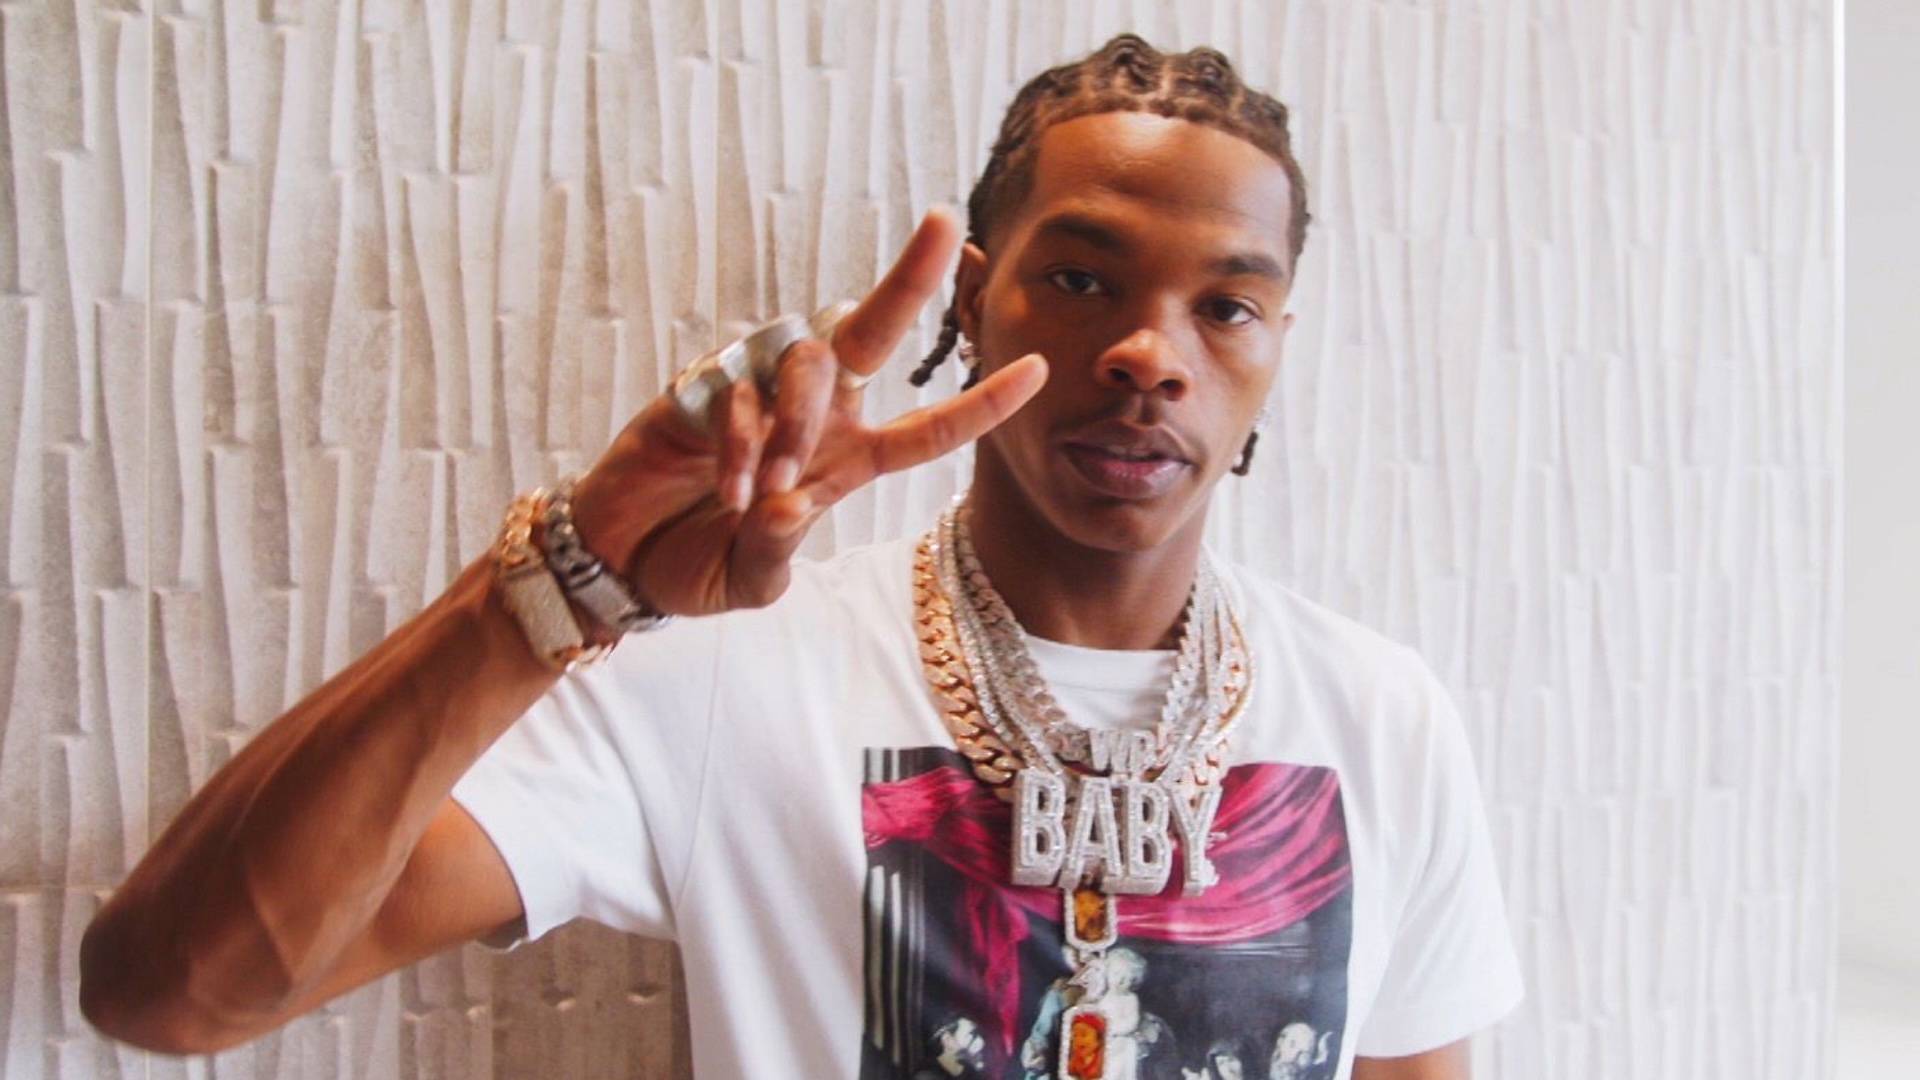 Quality Control, Lil Baby & DaBaby: Baby (Music Video 2019